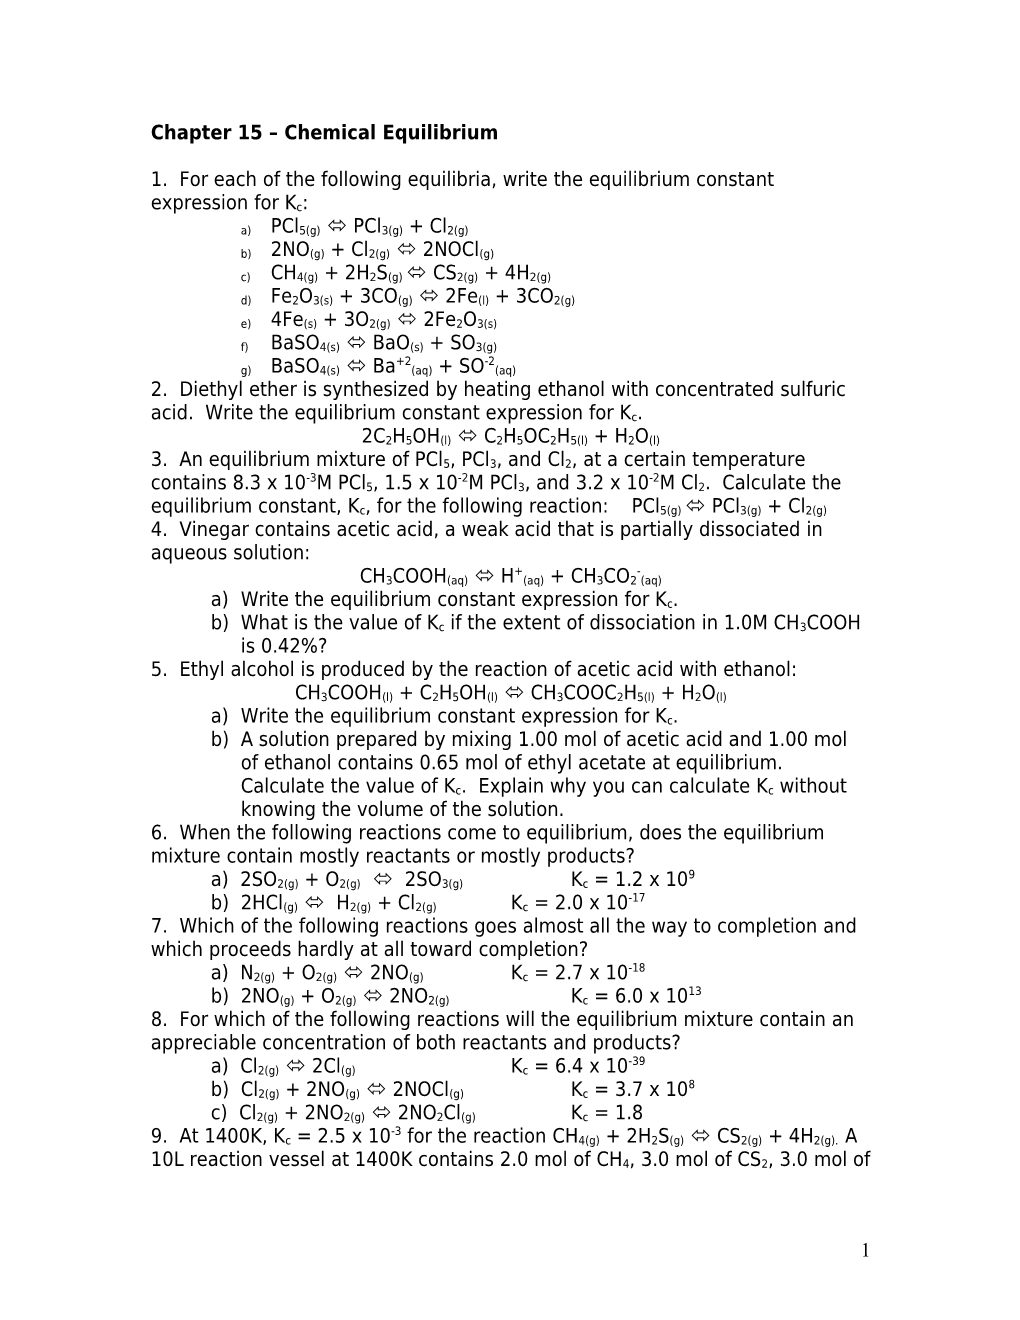 Chapter 13 Chemical Equilibrium